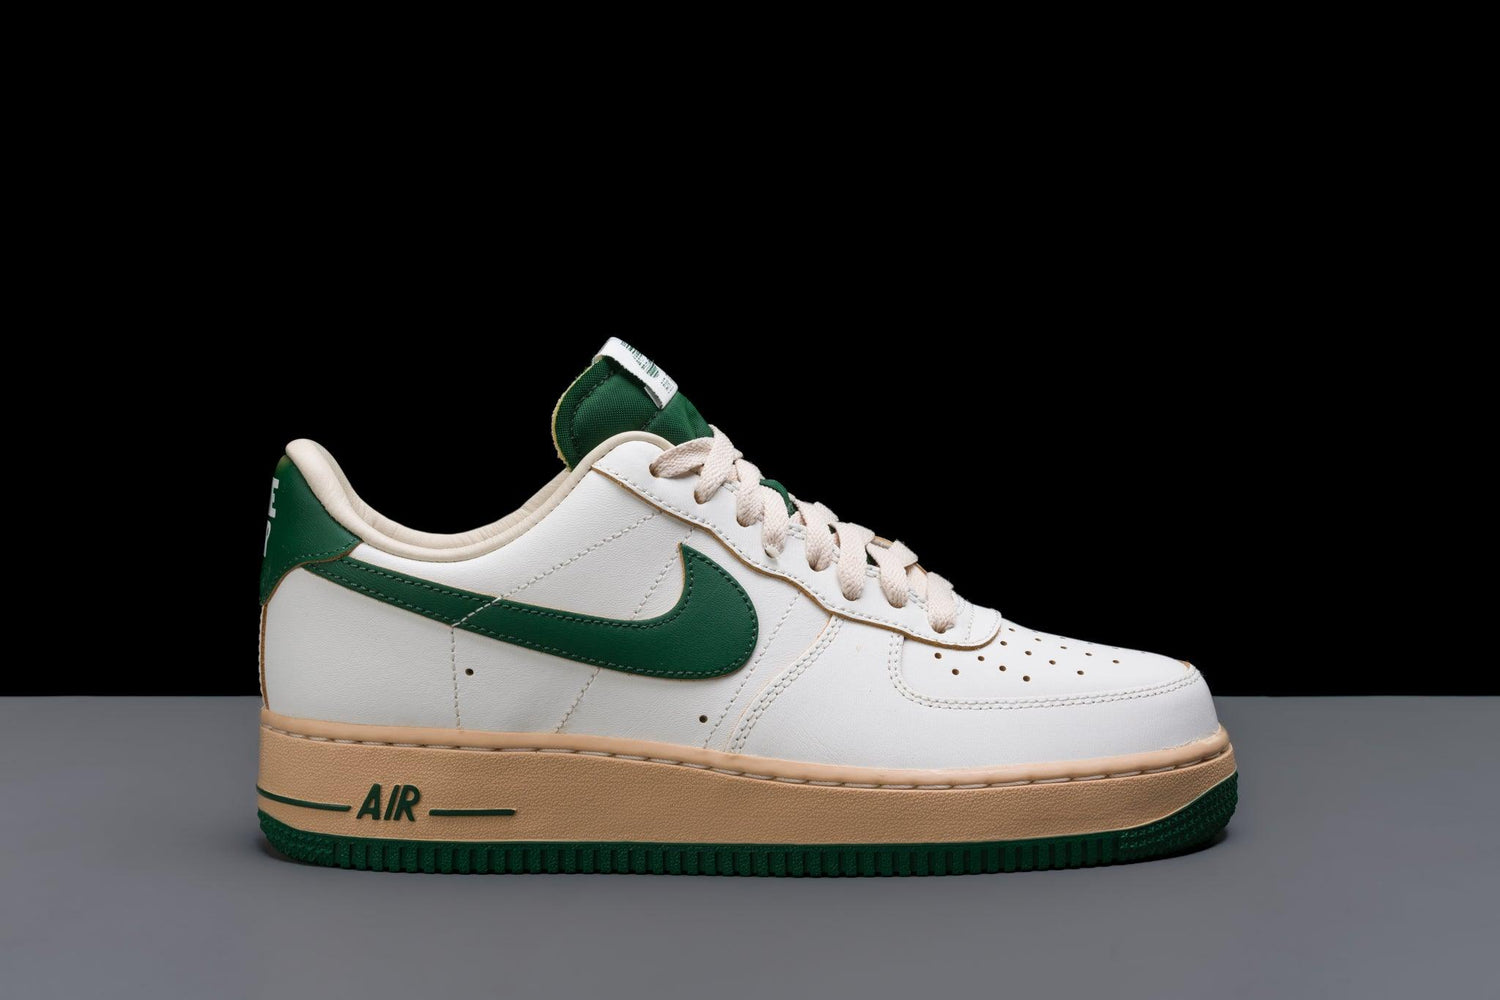 nike air force 1 low vintage gorge green lo10m 1 1500x